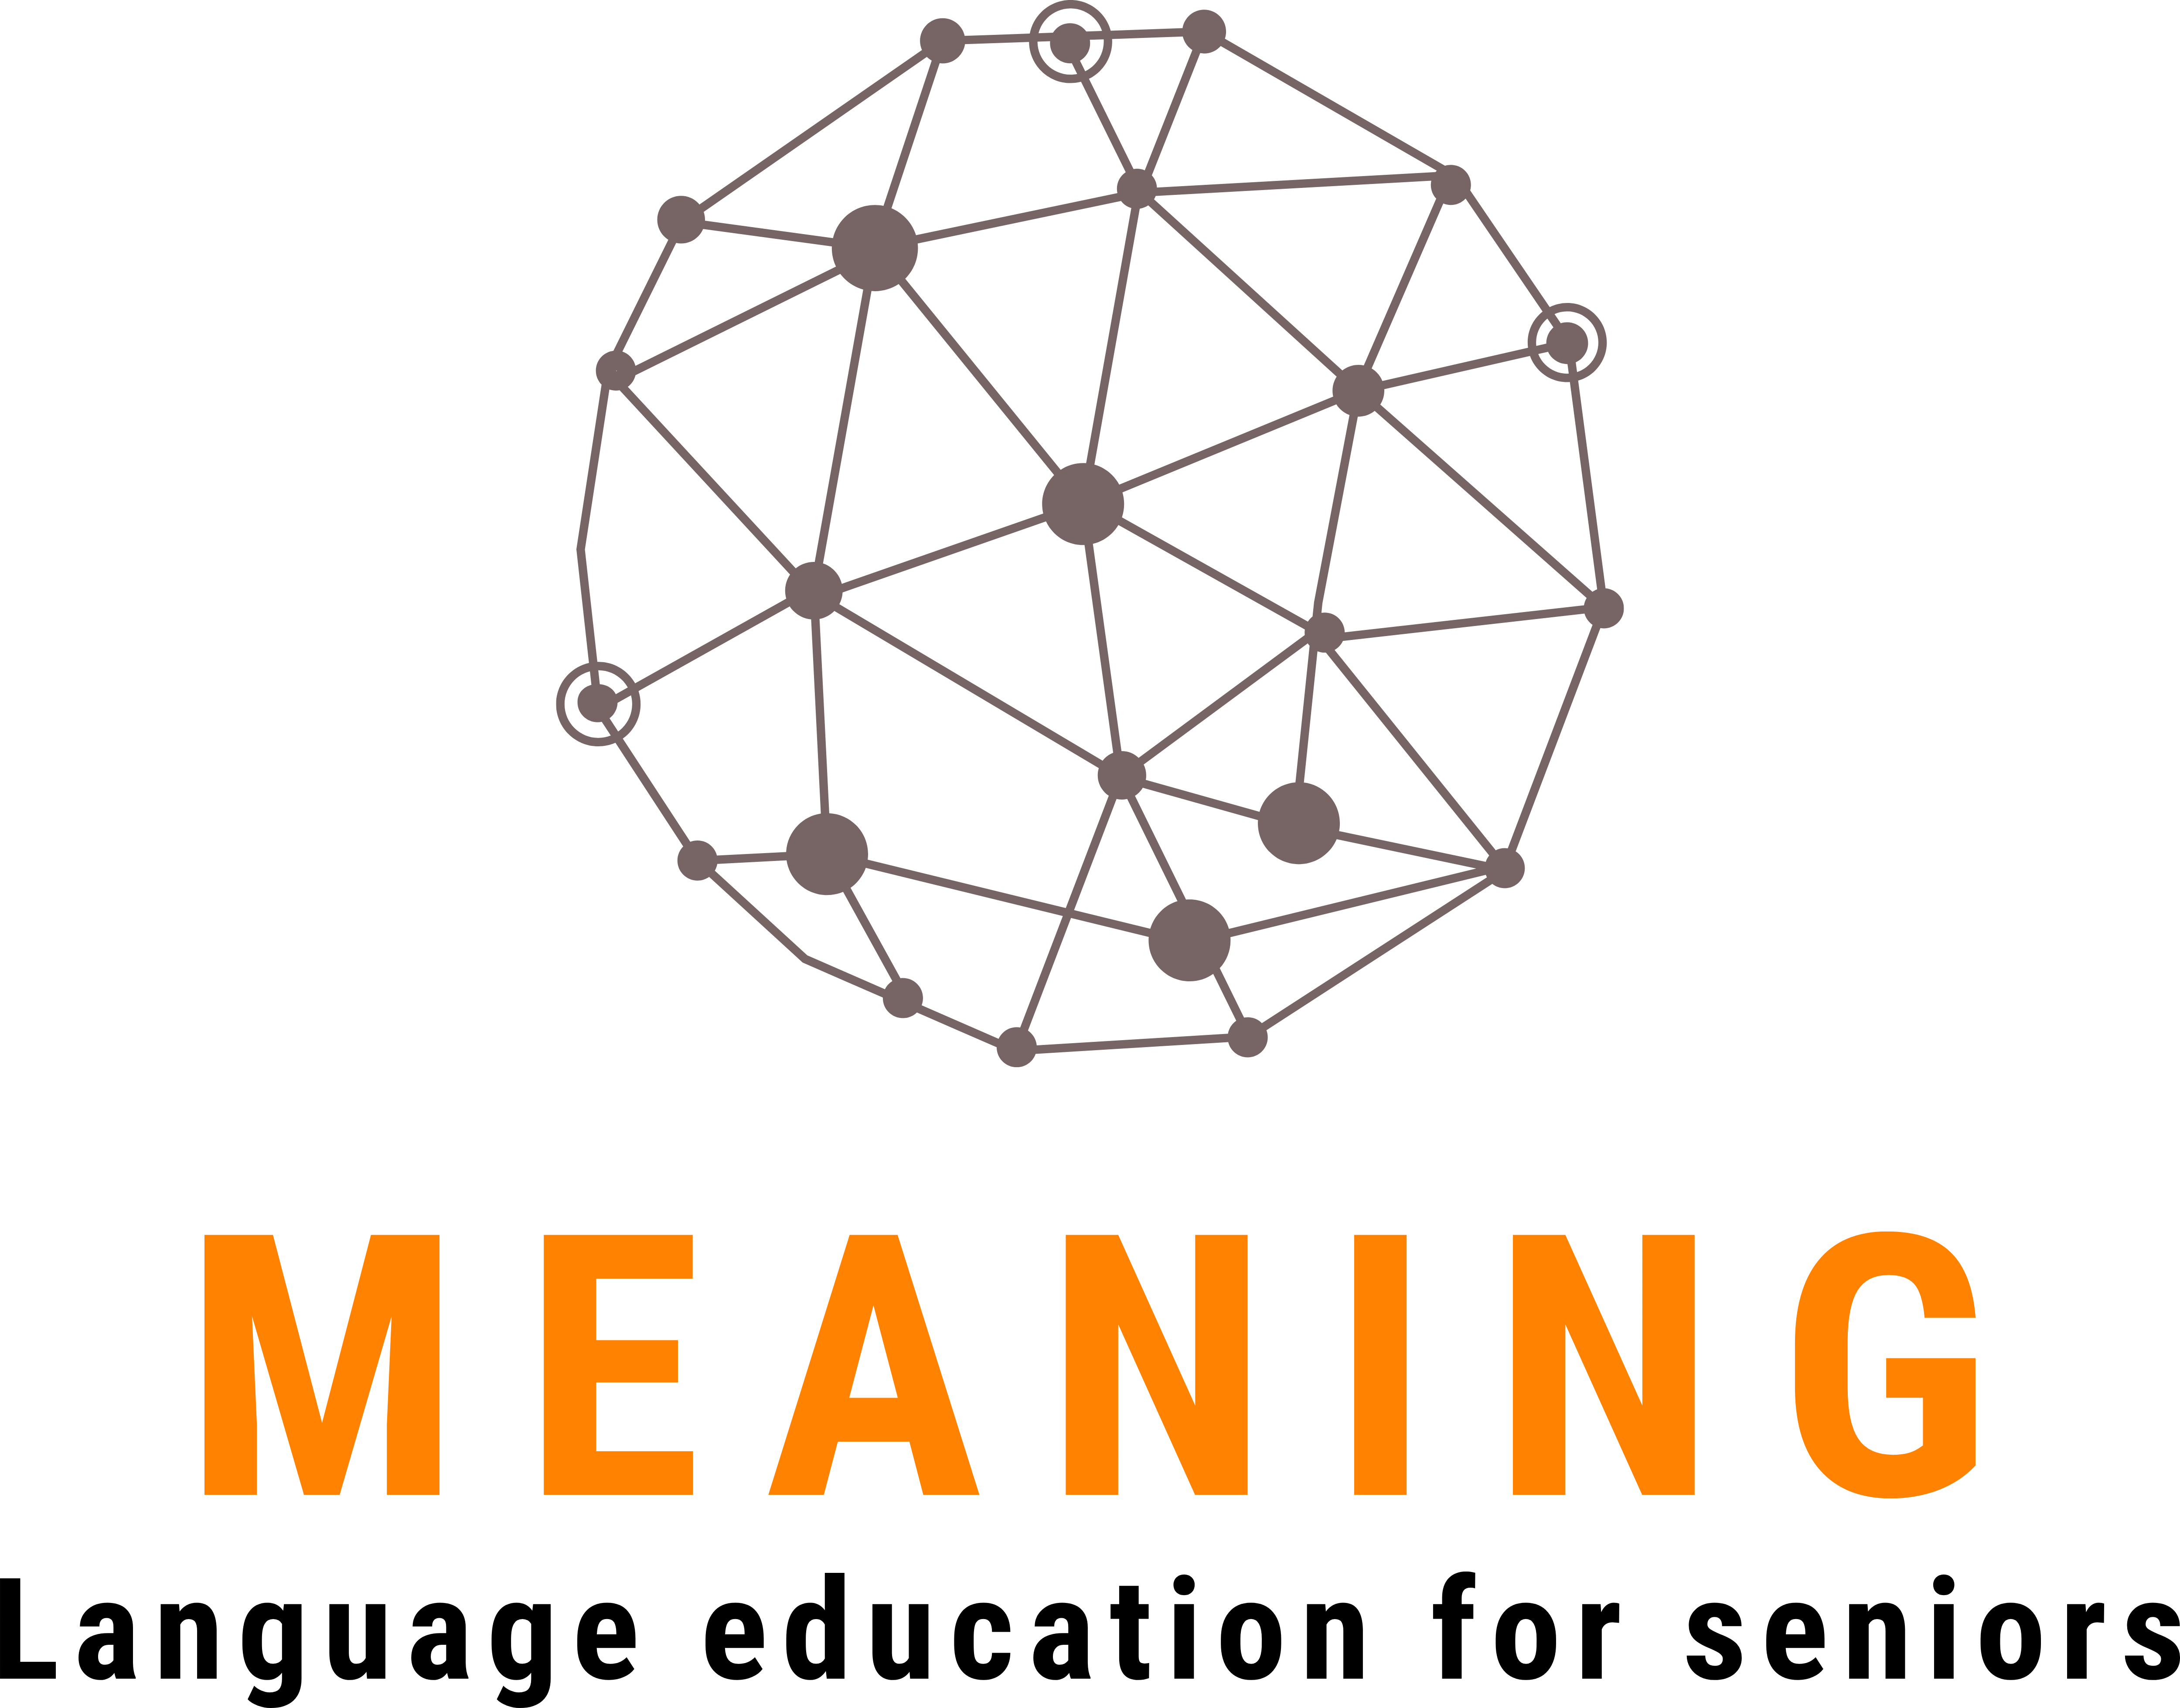 Project Meaning